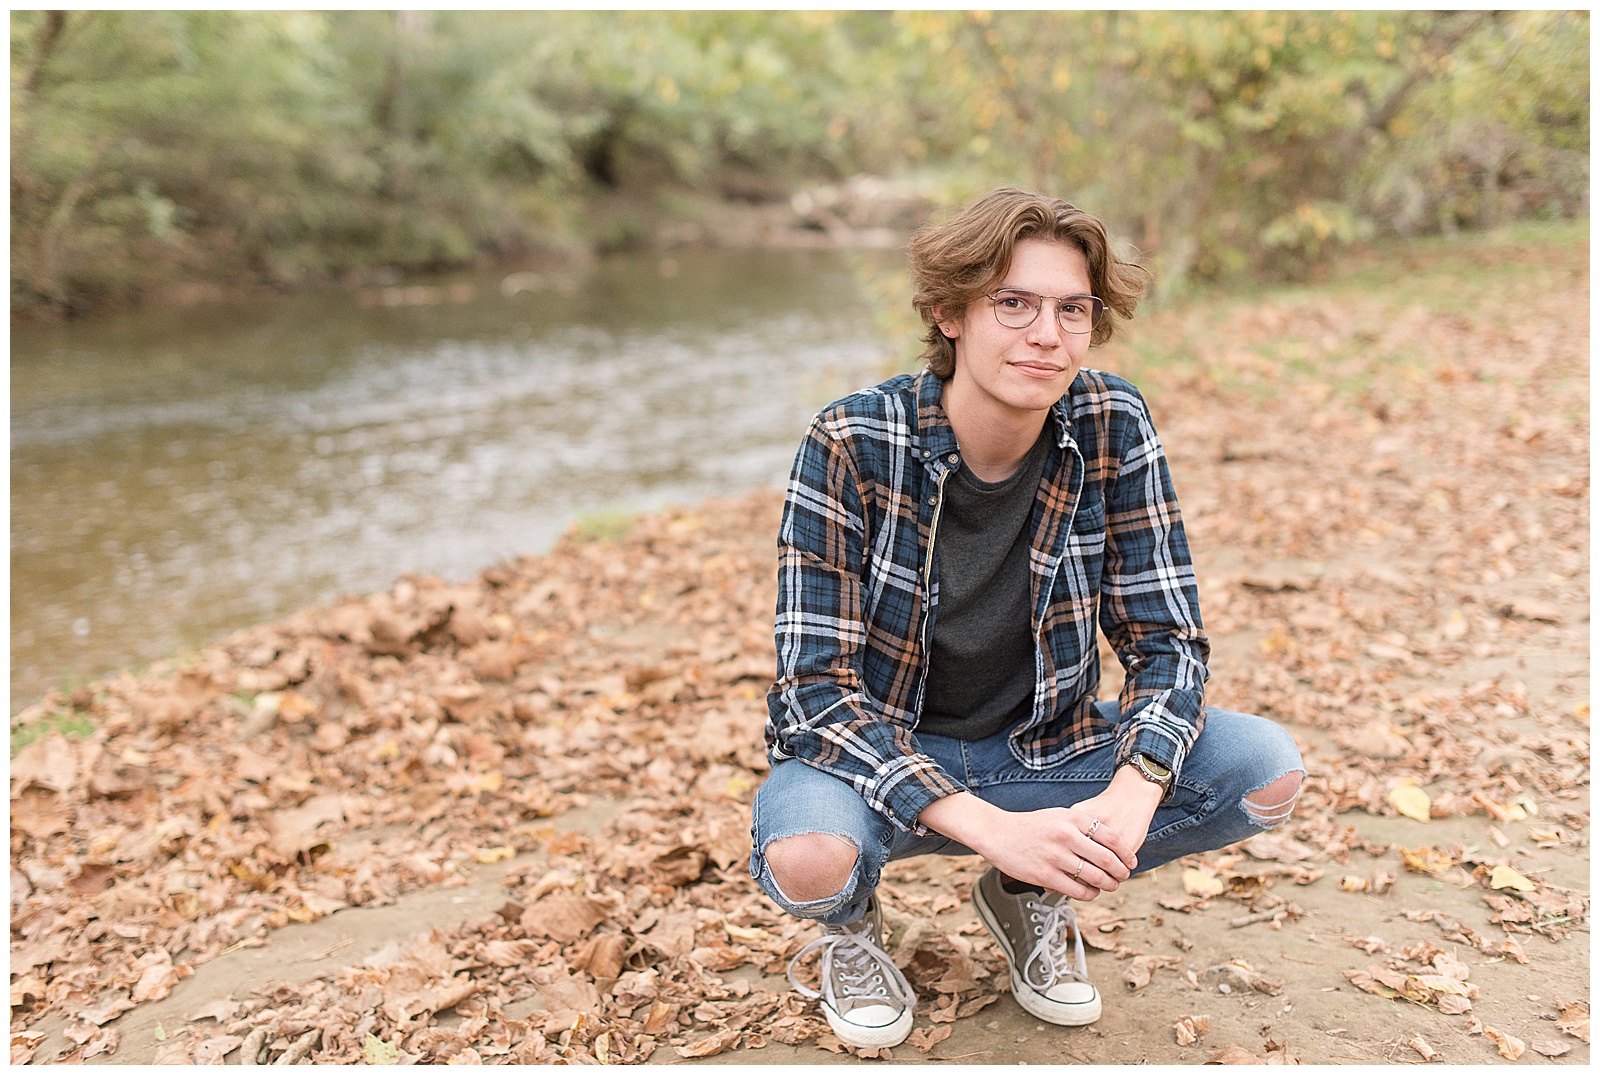 male senior spokesmodel crouching down with elbows on knees and hands together on dry leaves by river at lancaster county park on fall day